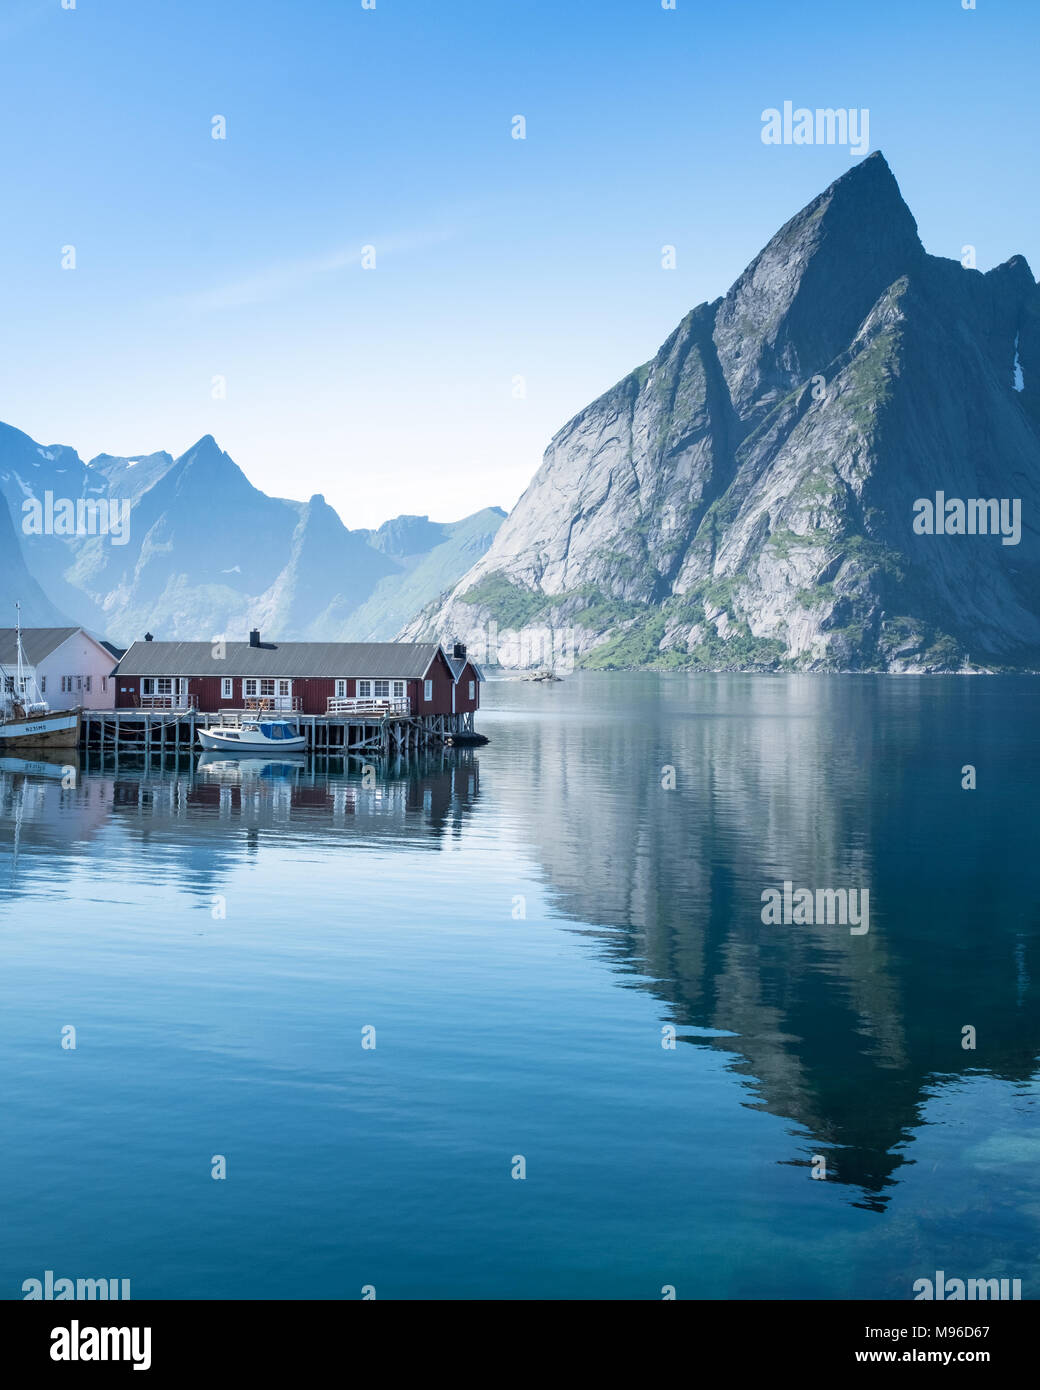 Scenic landscape with mountains and idyllic village at bright summer day in Lofoten Islands, Norway Stock Photo